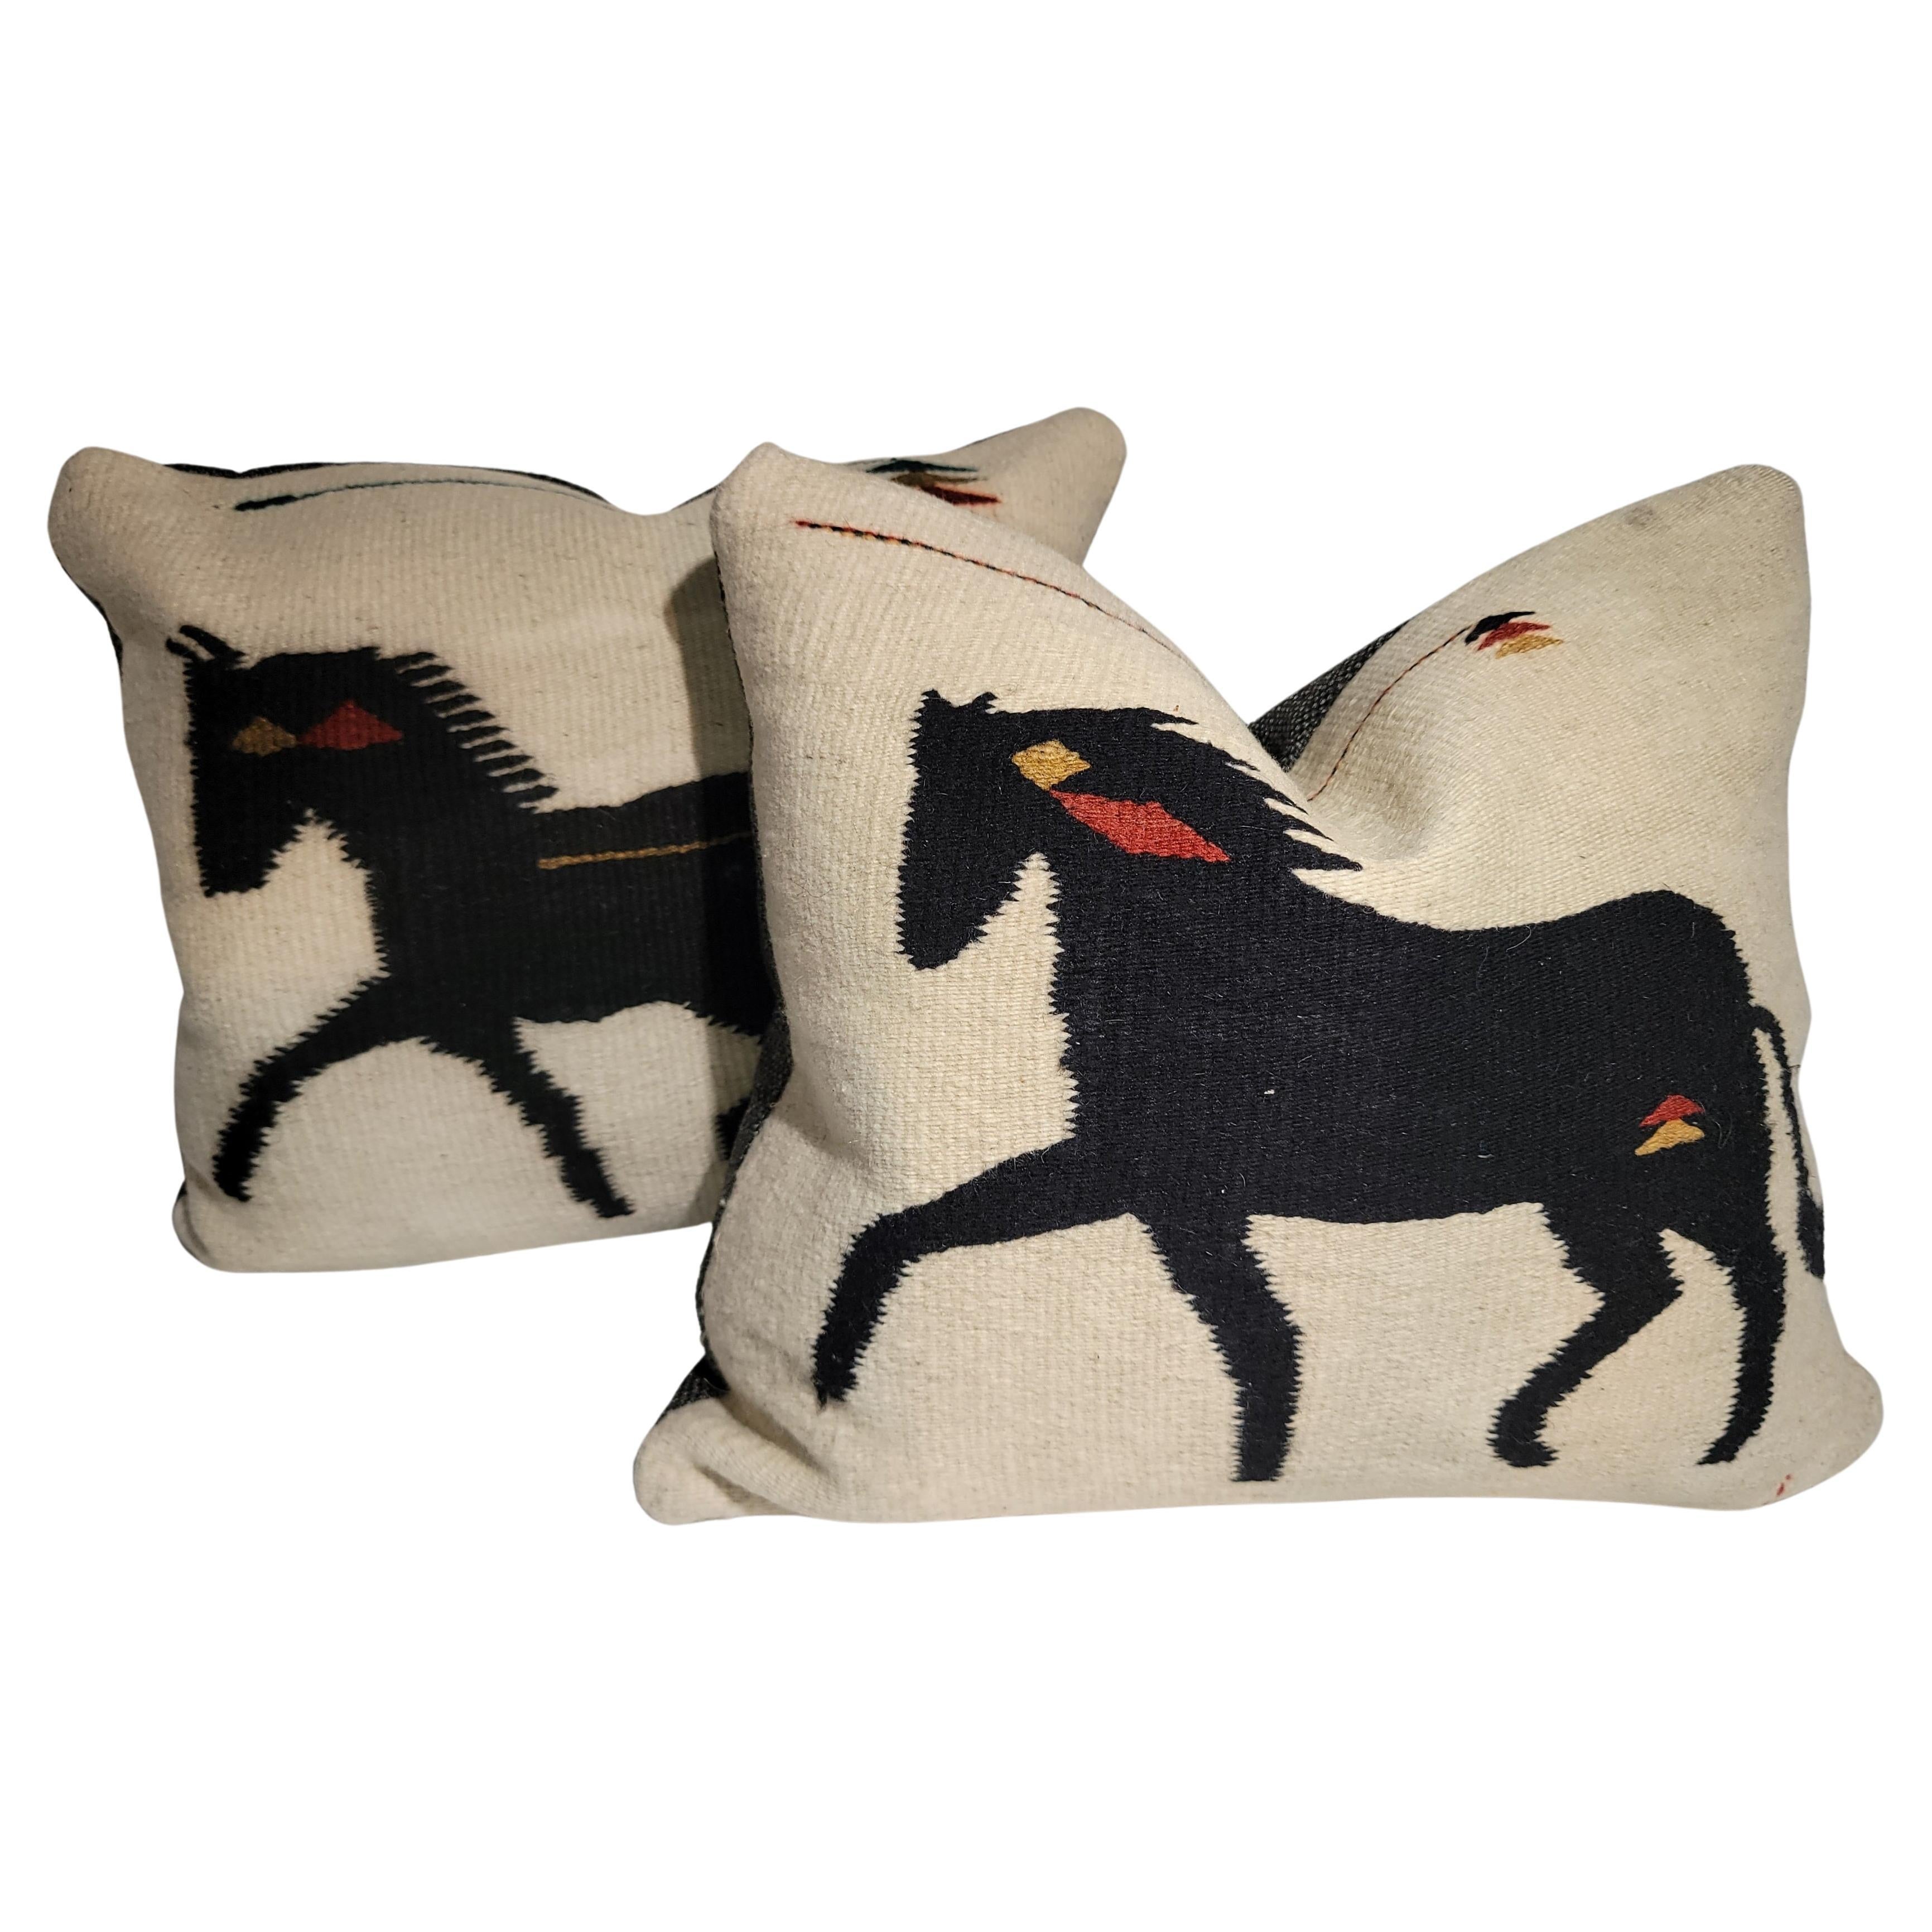 Mexican Indian Weaving Horse Pillows -Pair For Sale